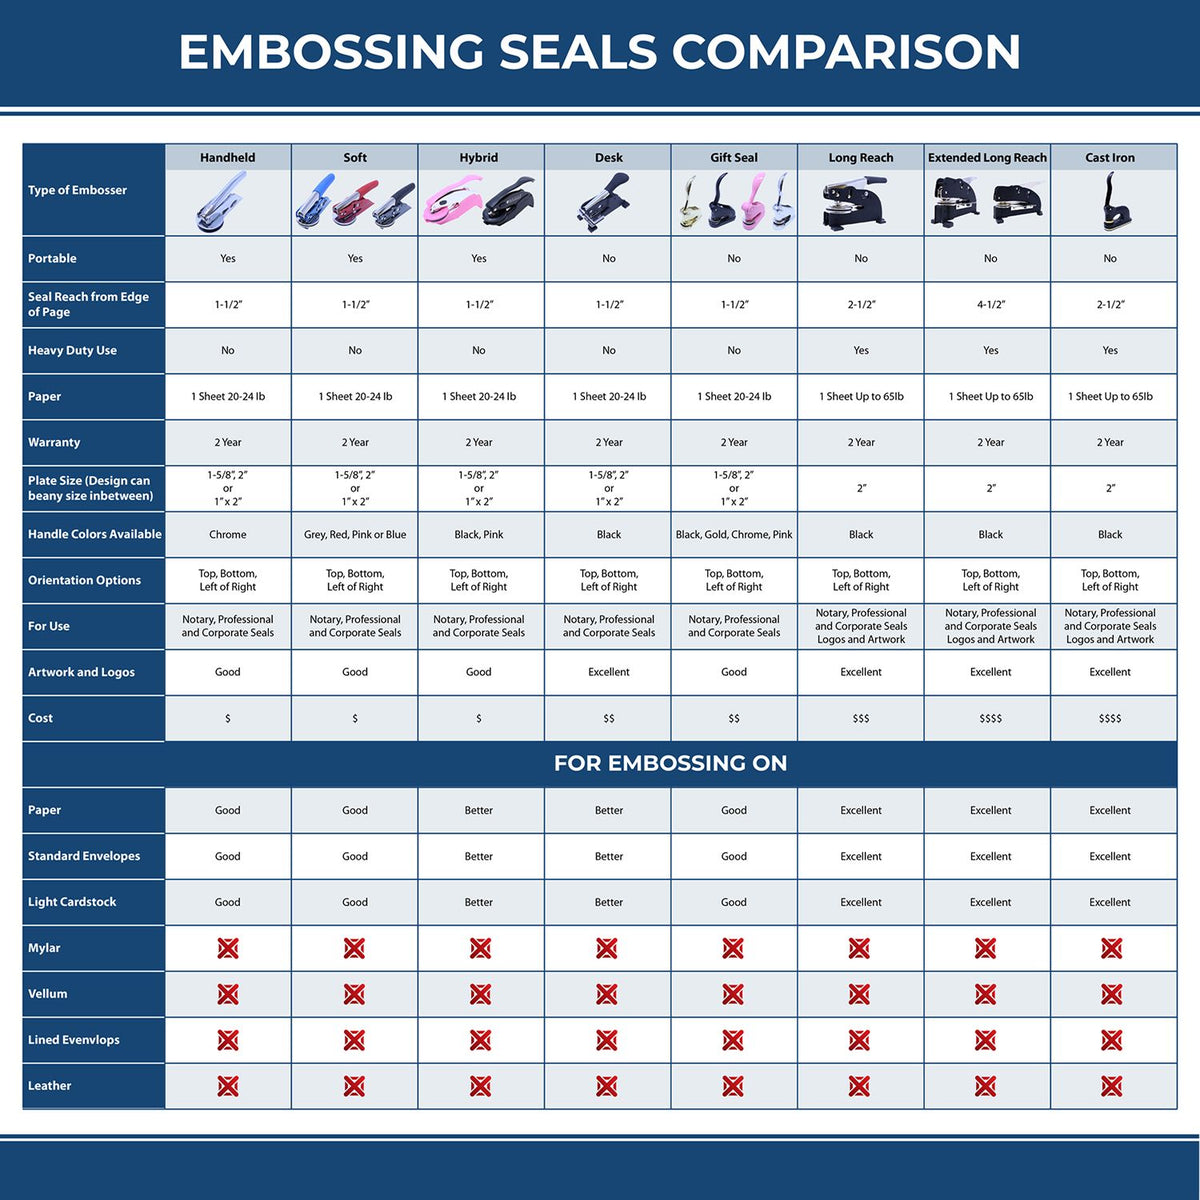 A comparison chart for the different types of mount models available for the Hybrid New Hampshire Geologist Seal